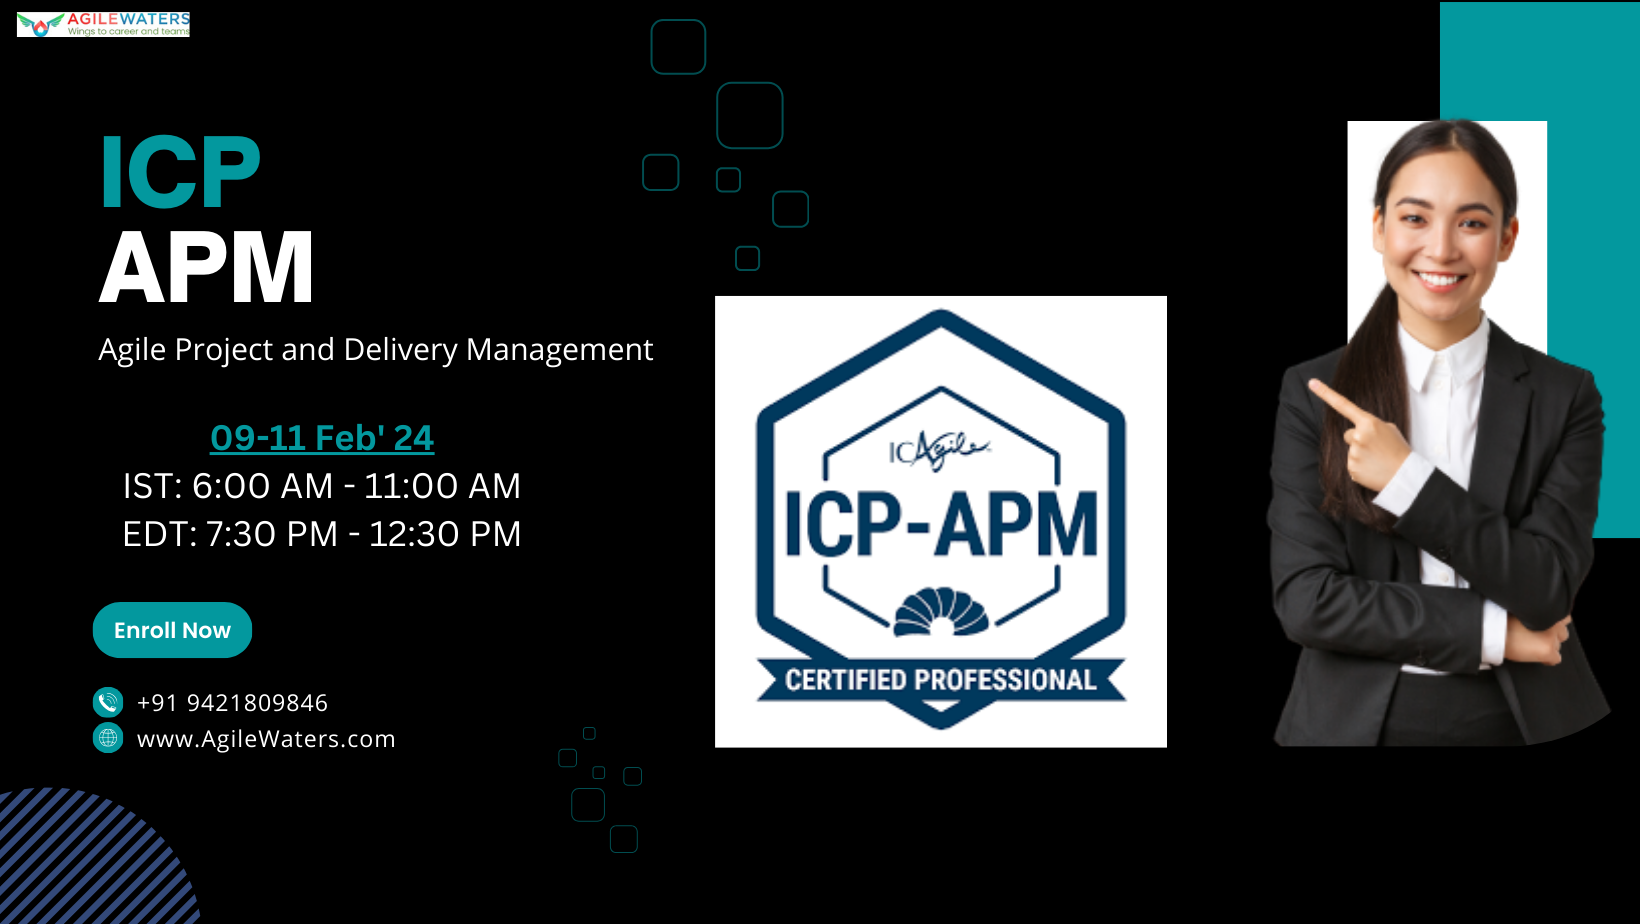 ICP-APM ( Agile Project and Delivery Management ), Online Event